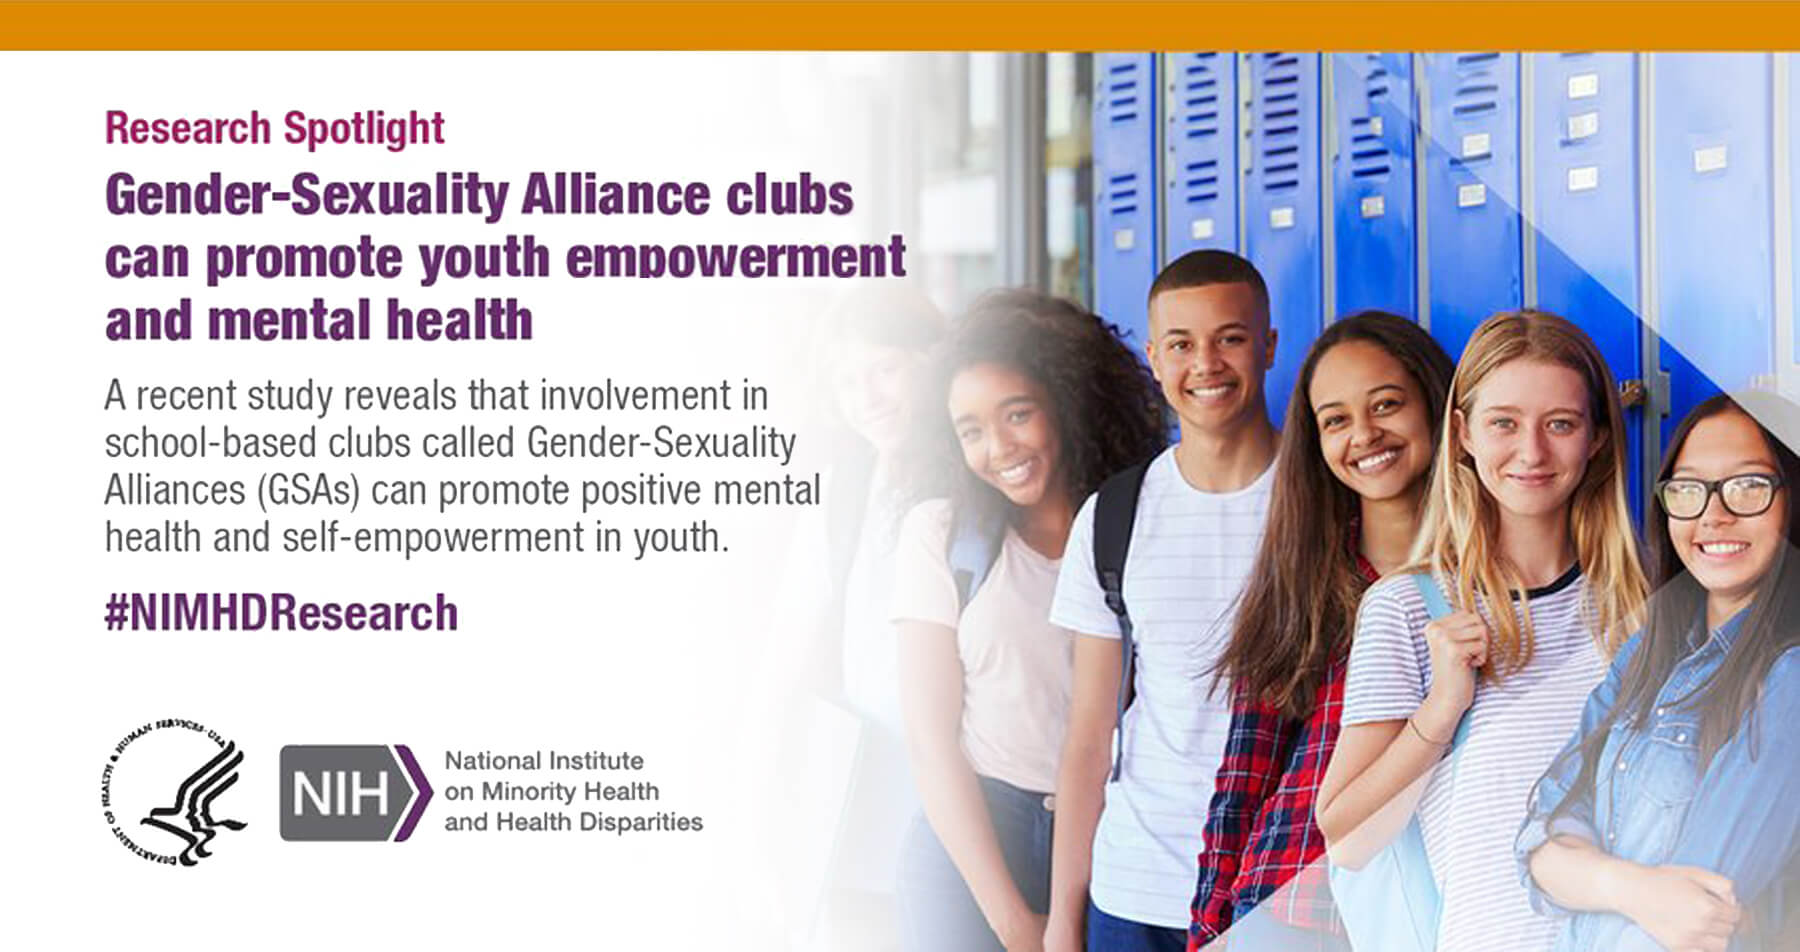 NIMHD Research Spotlight: Gender-sexuality alliance clubs can promote youth empowerment and mental health